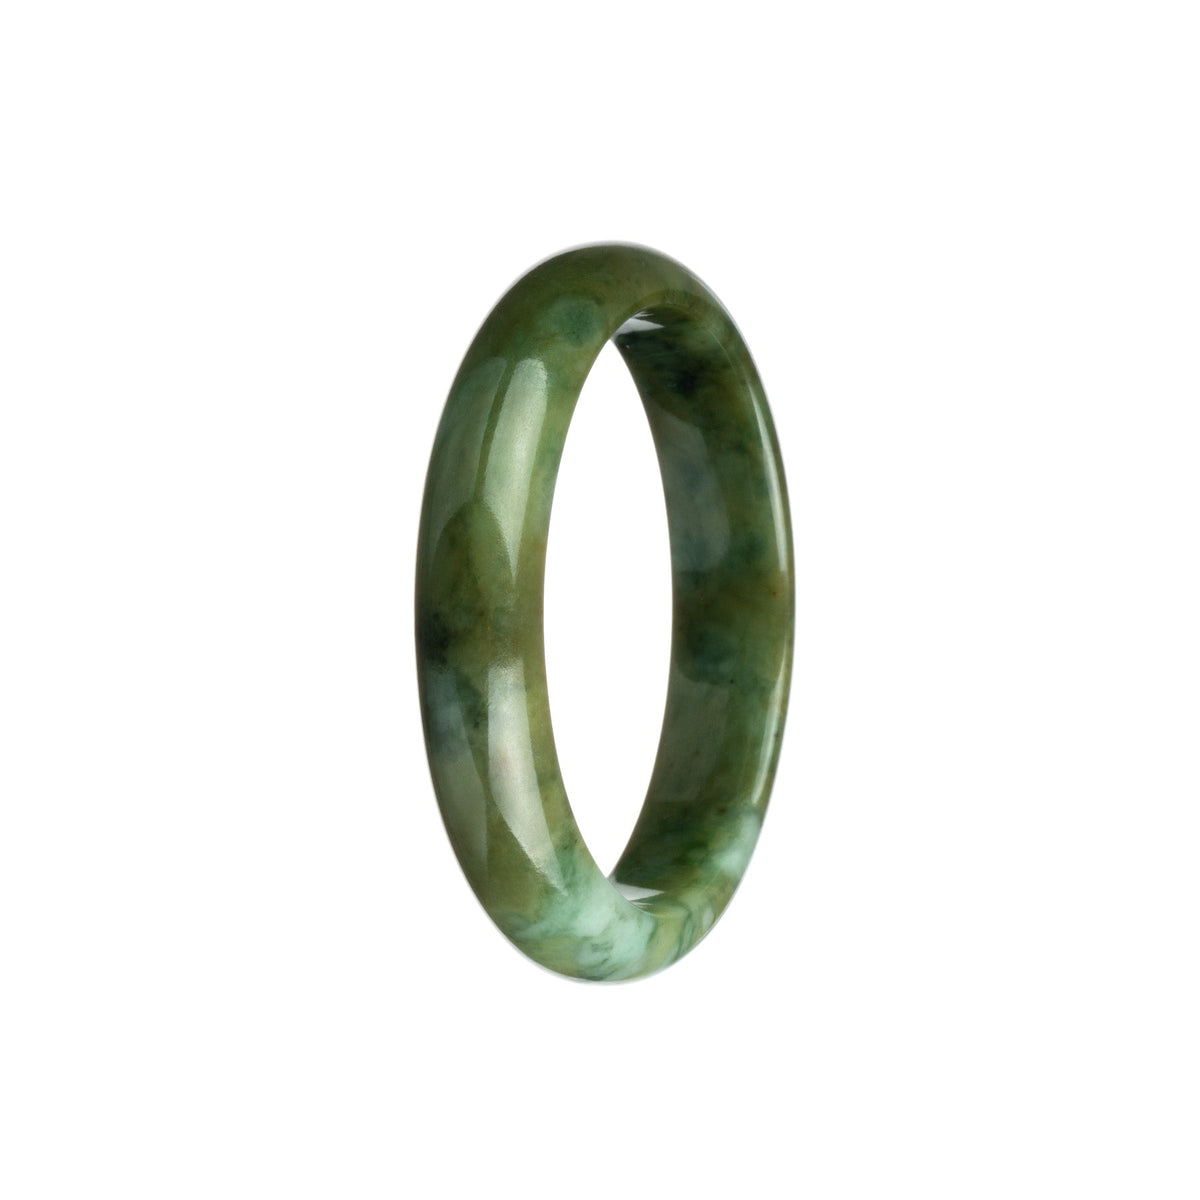 A close-up photo of a genuine grade A olive green traditional jade bangle, featuring a half moon shape with a diameter of 55mm. Offered by MAYS GEMS.